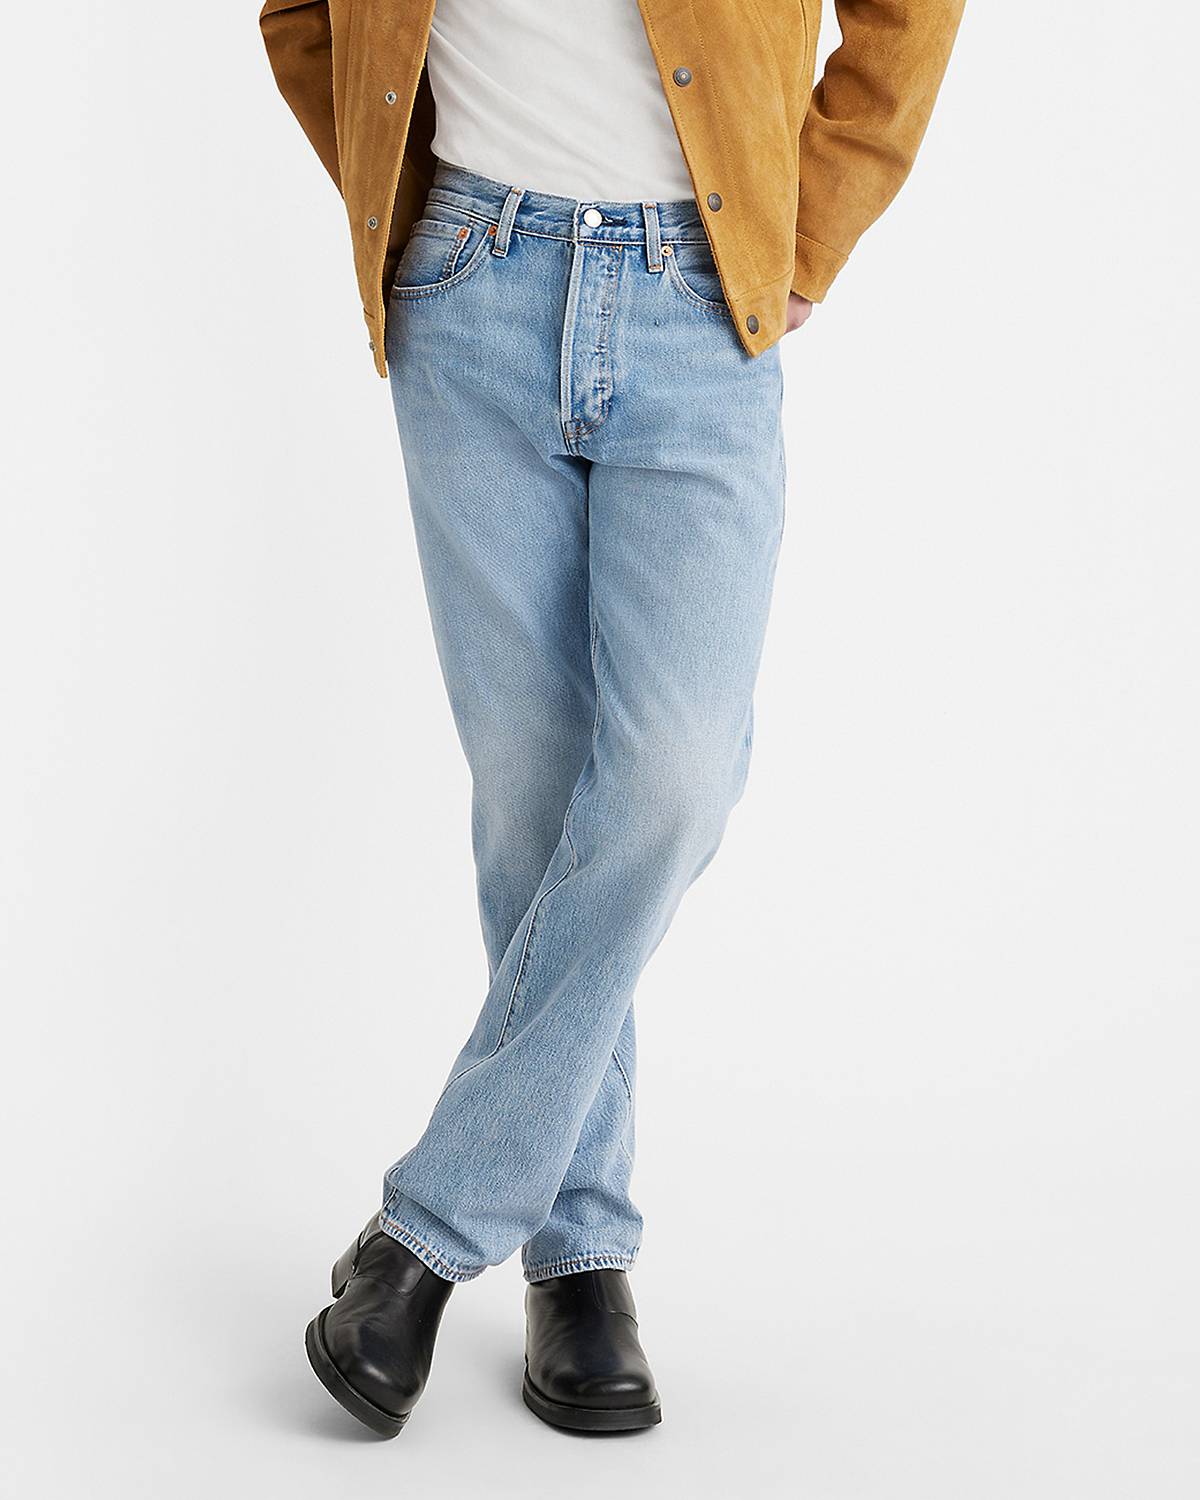 The Essentials: Gray Denim - 6 Complete Outfits That Prove It Will Change  Your Wardrobe